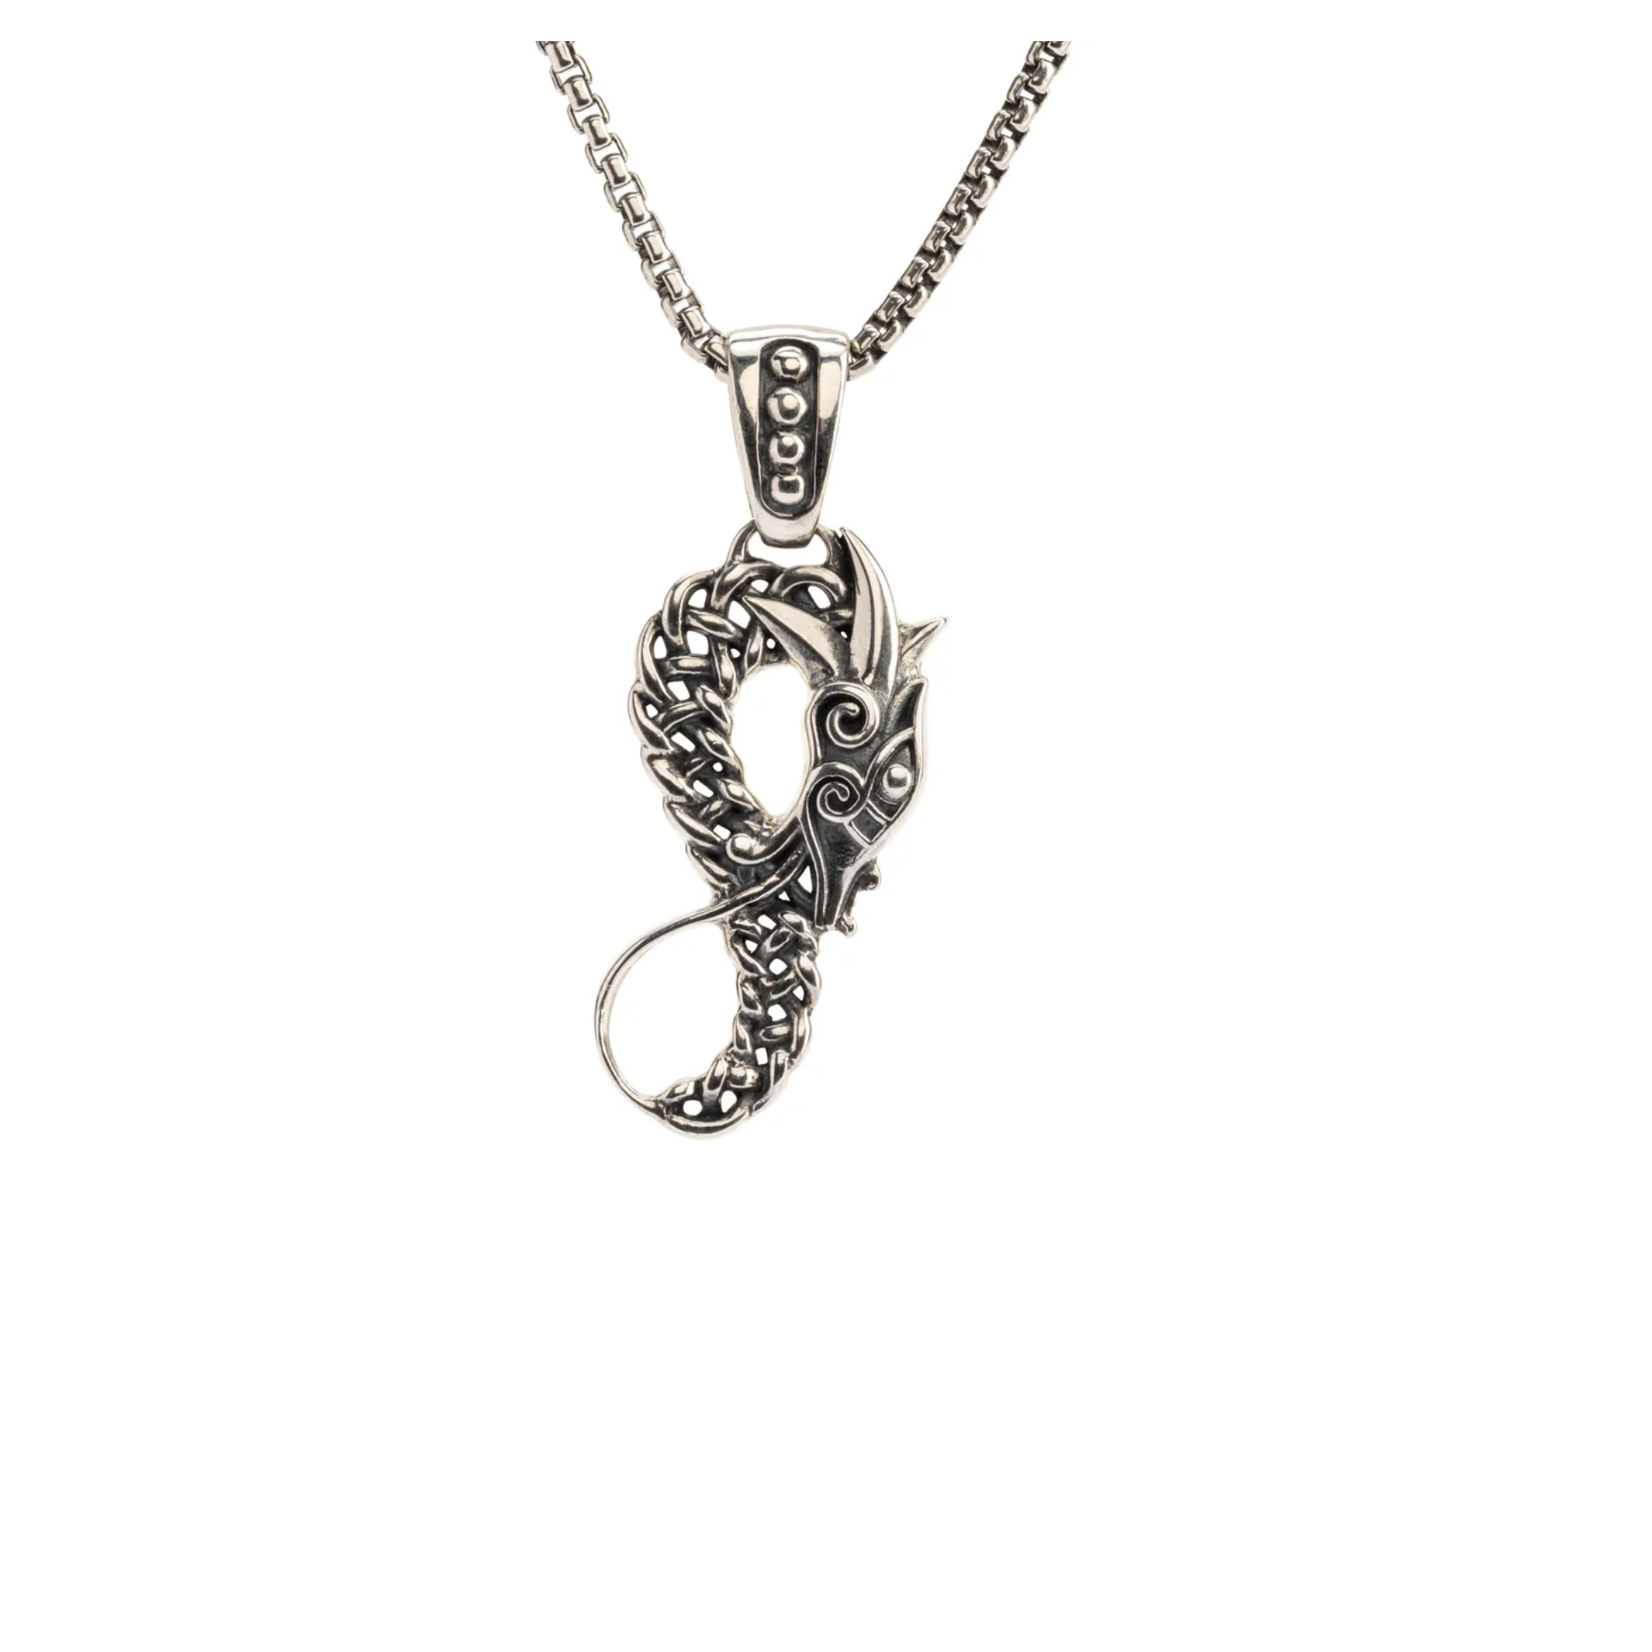 Keith Jack Small Silver and Bronze Reversible Dragon Necklace